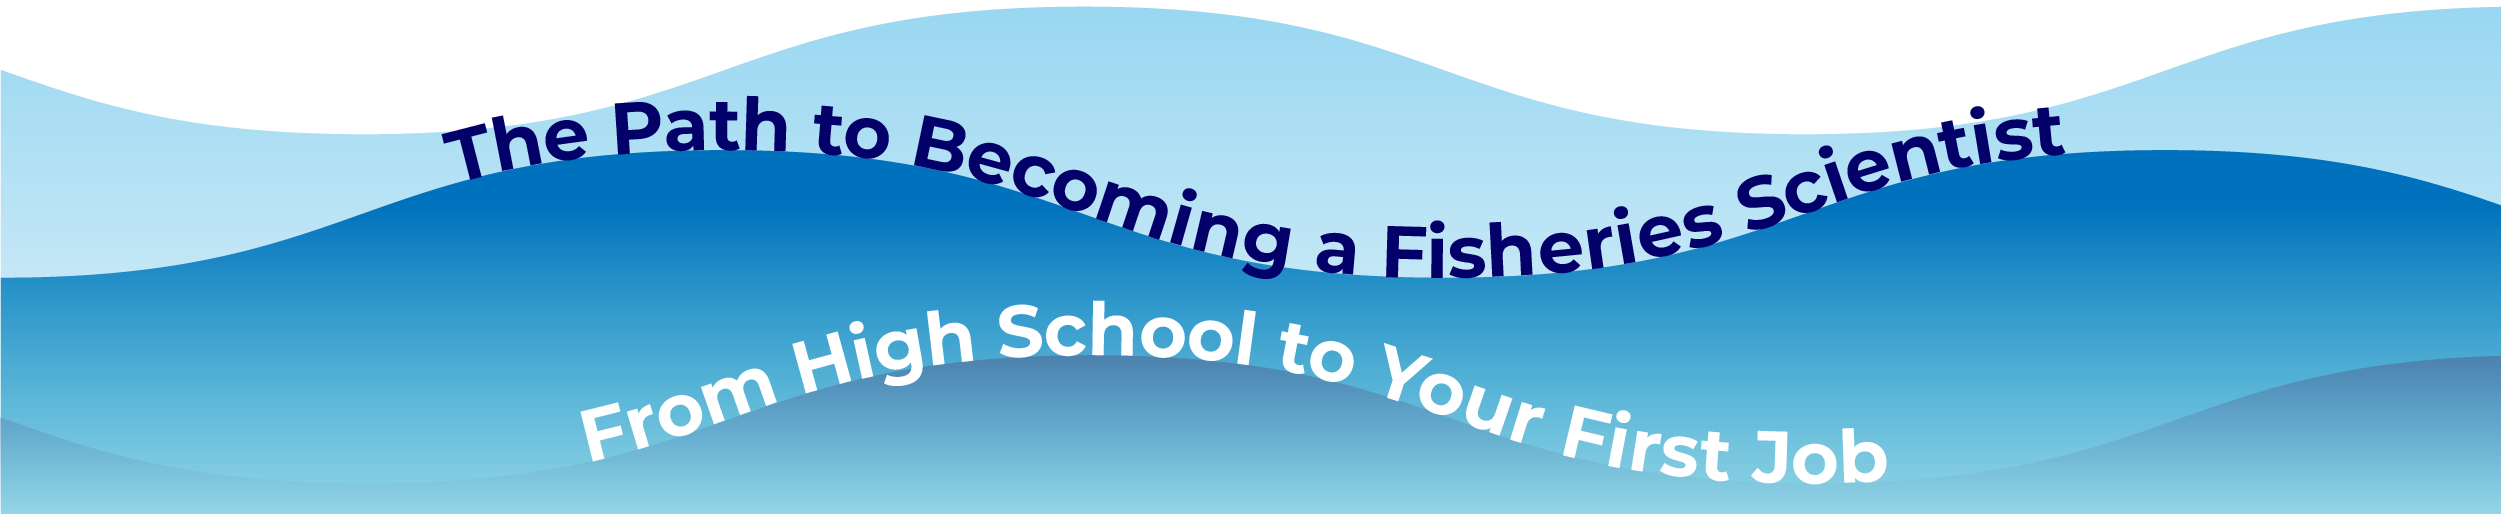 The path to becoming a Fisheries Scientist